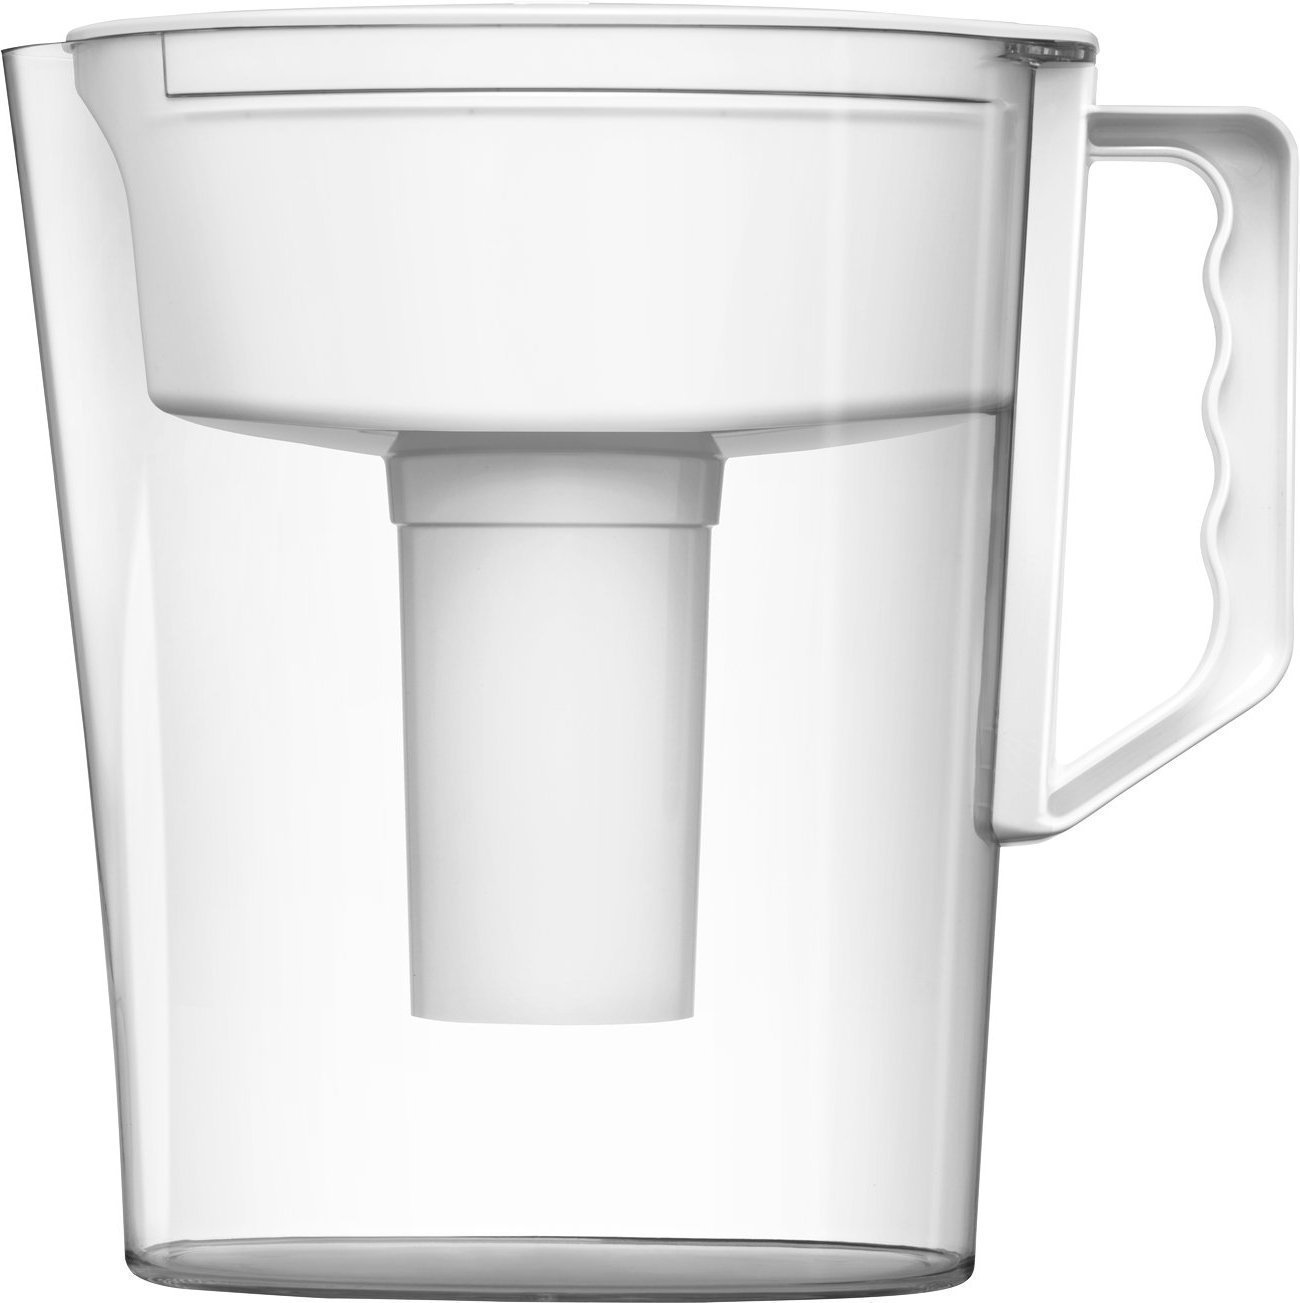 Brita Slim Water Pitcher with 1 Filter, BPA Free, White, 5 Cup - image 1 of 5